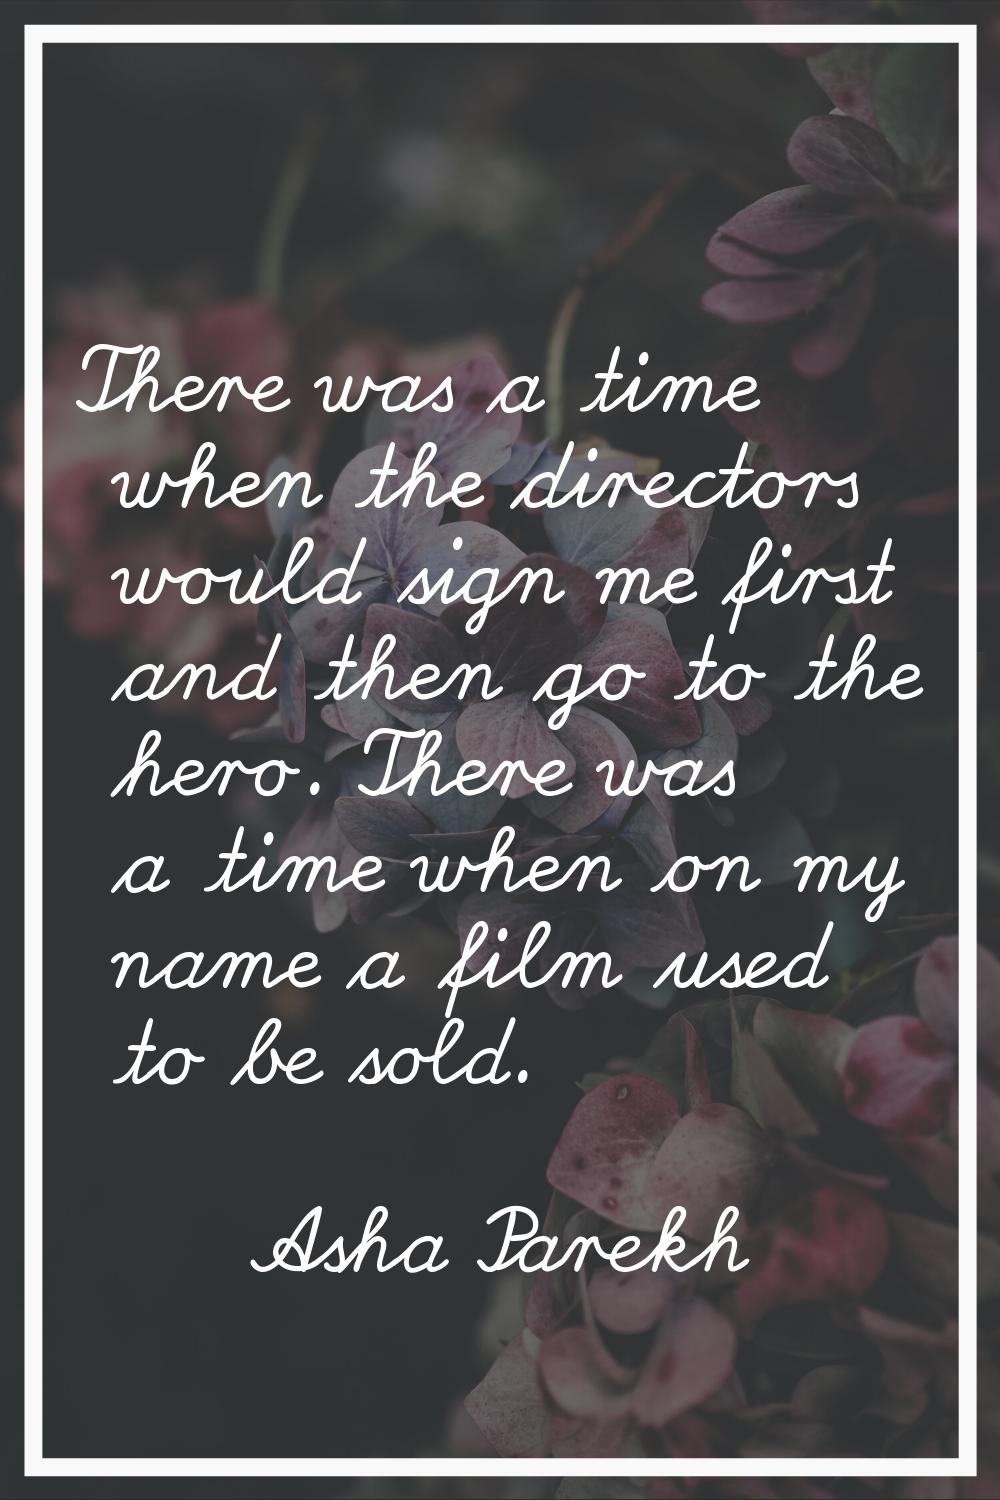 There was a time when the directors would sign me first and then go to the hero. There was a time w